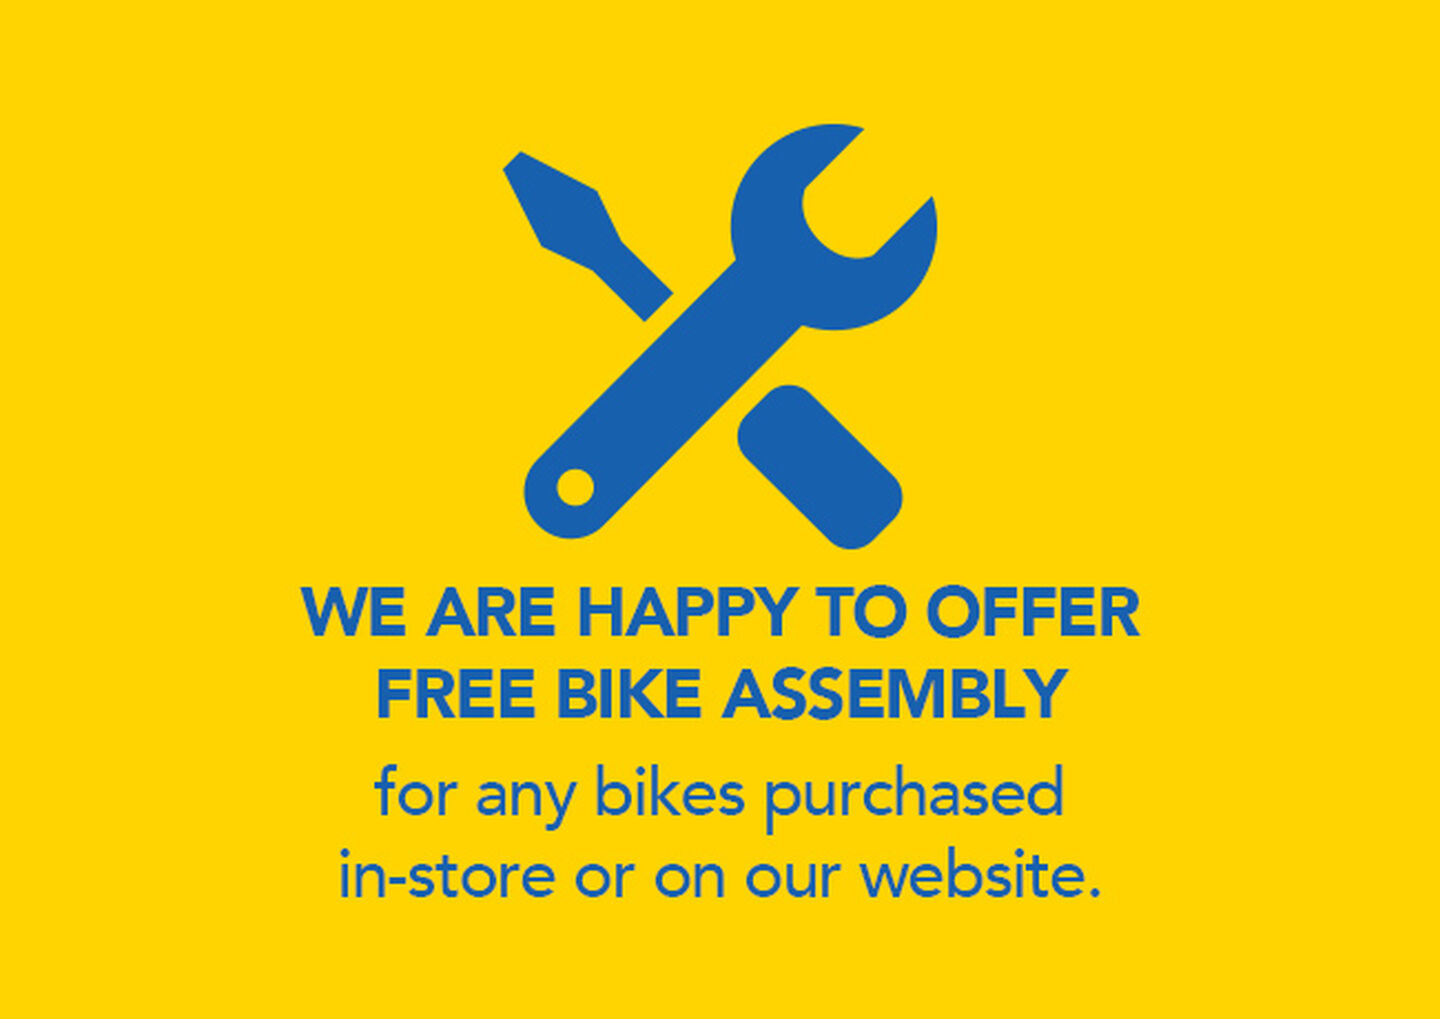 WE ARE HAPPY TO OFFER FREE BIKE ASSEMBLY for any bikes purchased in-store or on our website.